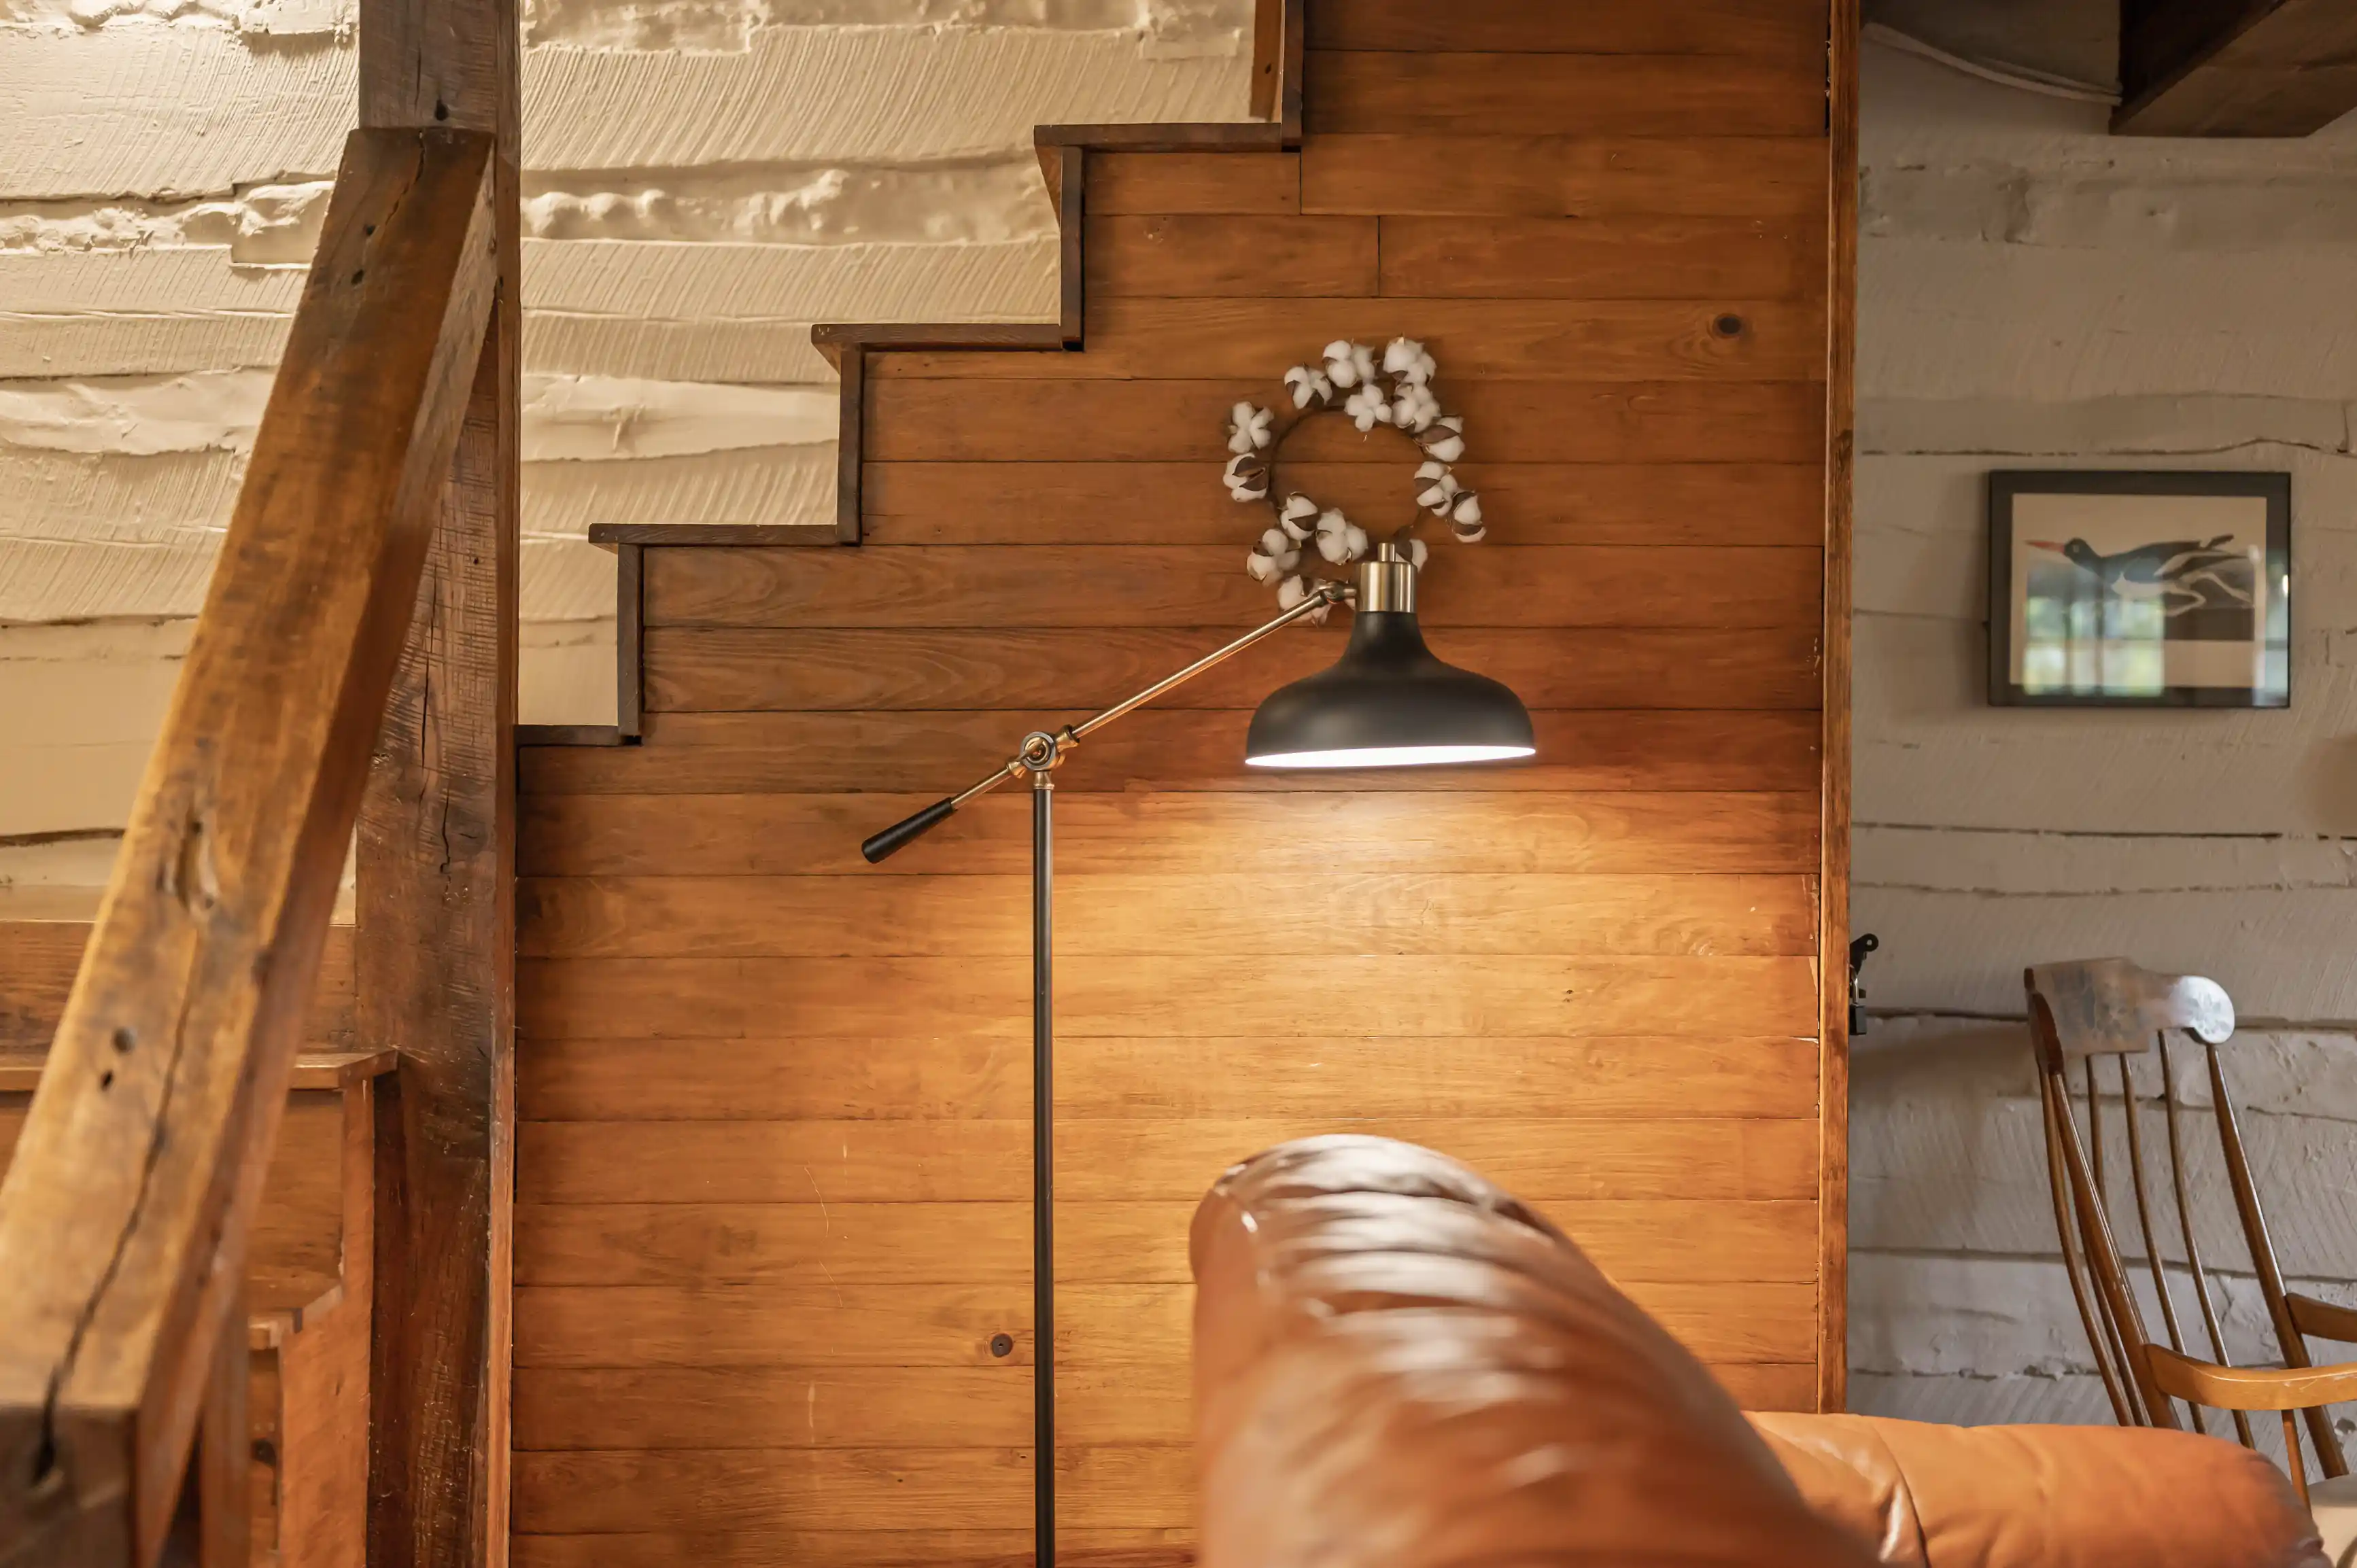 Cozy interior corner with leather sofa, wooden staircase, floor lamp, and a small bouquet on the wall.